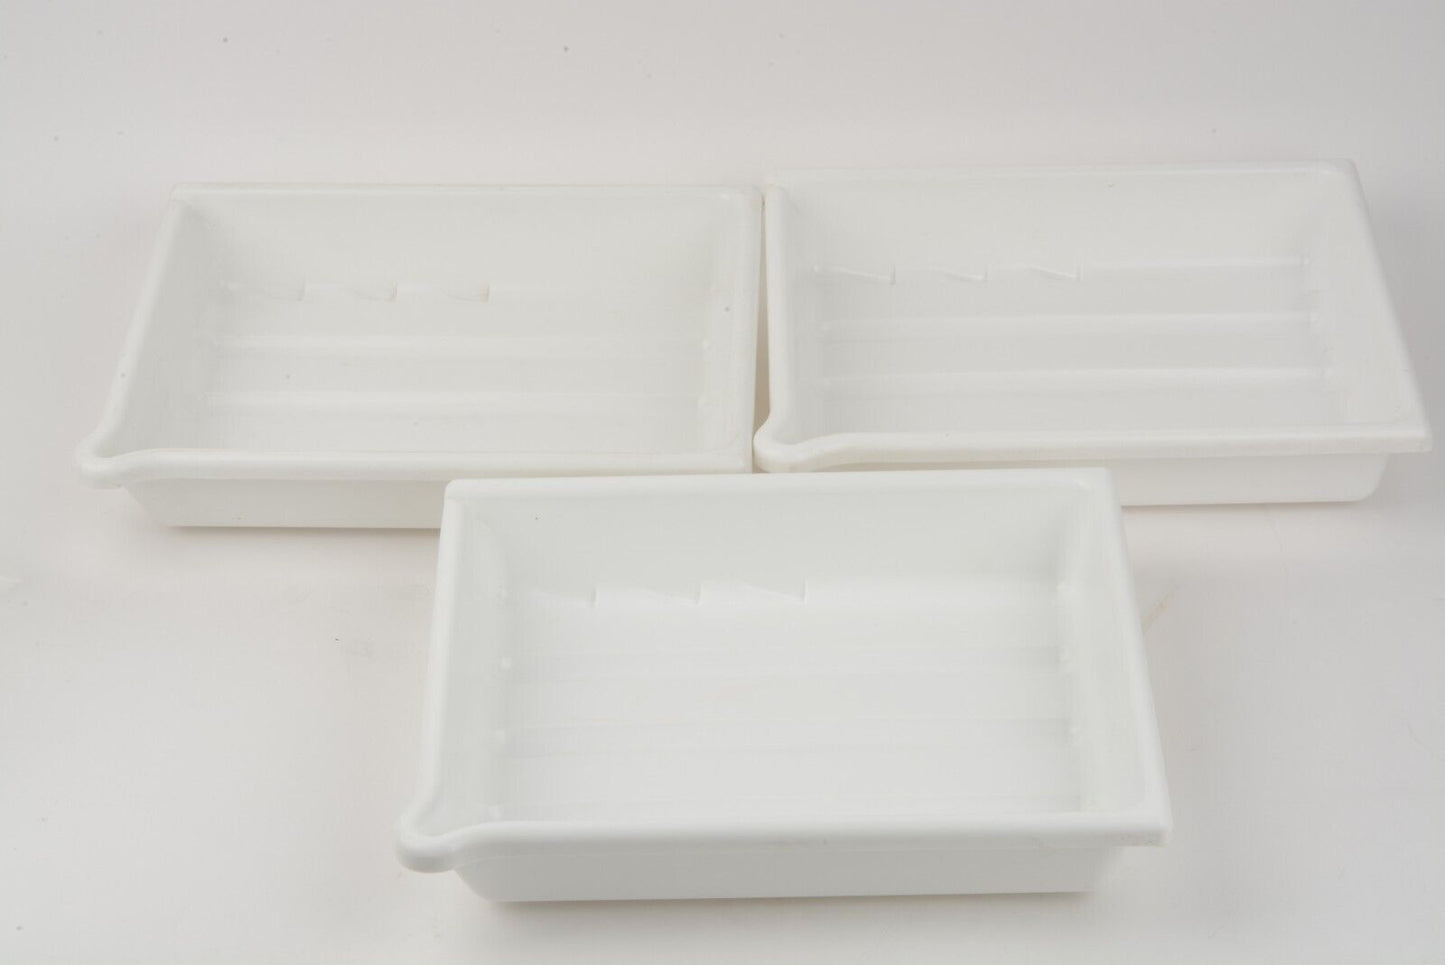 NEW SET OF 3 PATERSON 8x10 PRINT DEVELOPING TRAYS - WHITE - NEVER USED